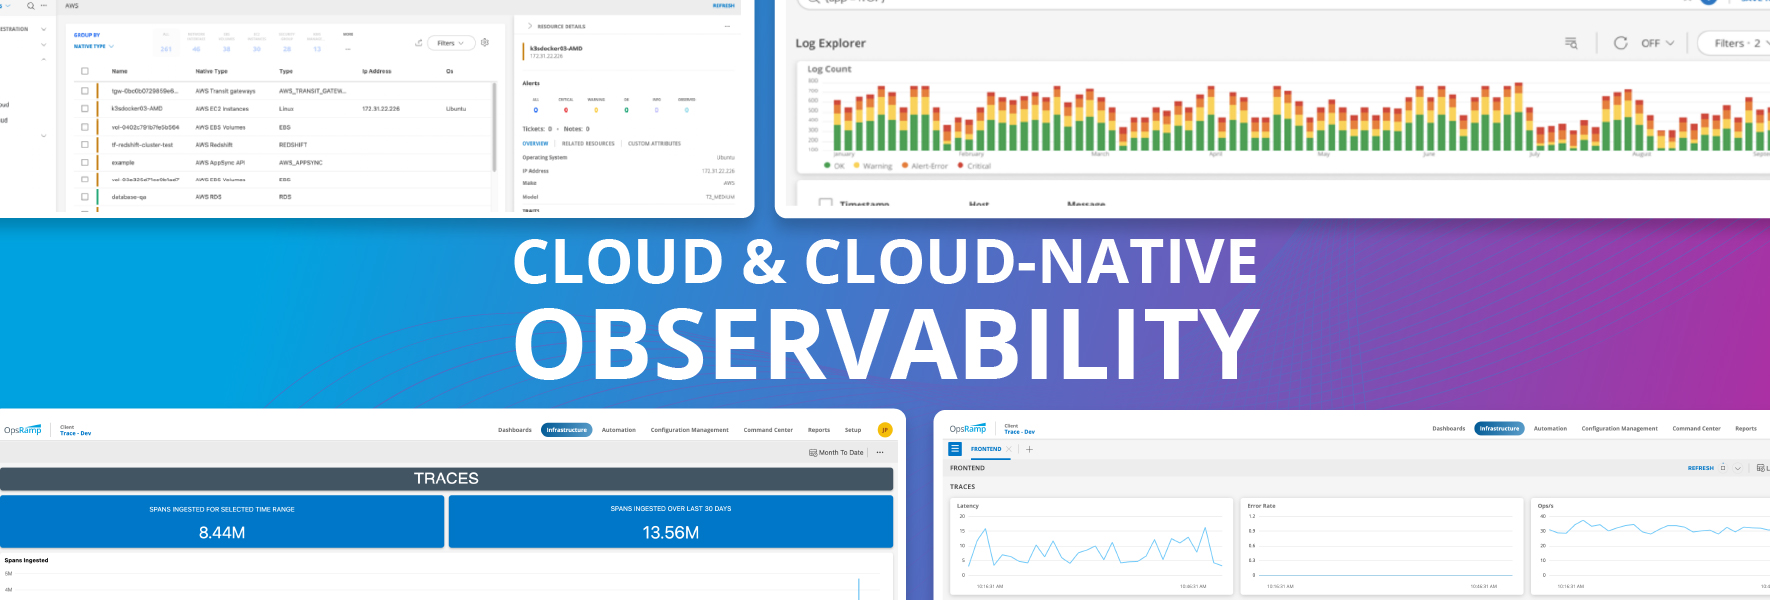 Demystifying Cloud and Cloud-Native Observability